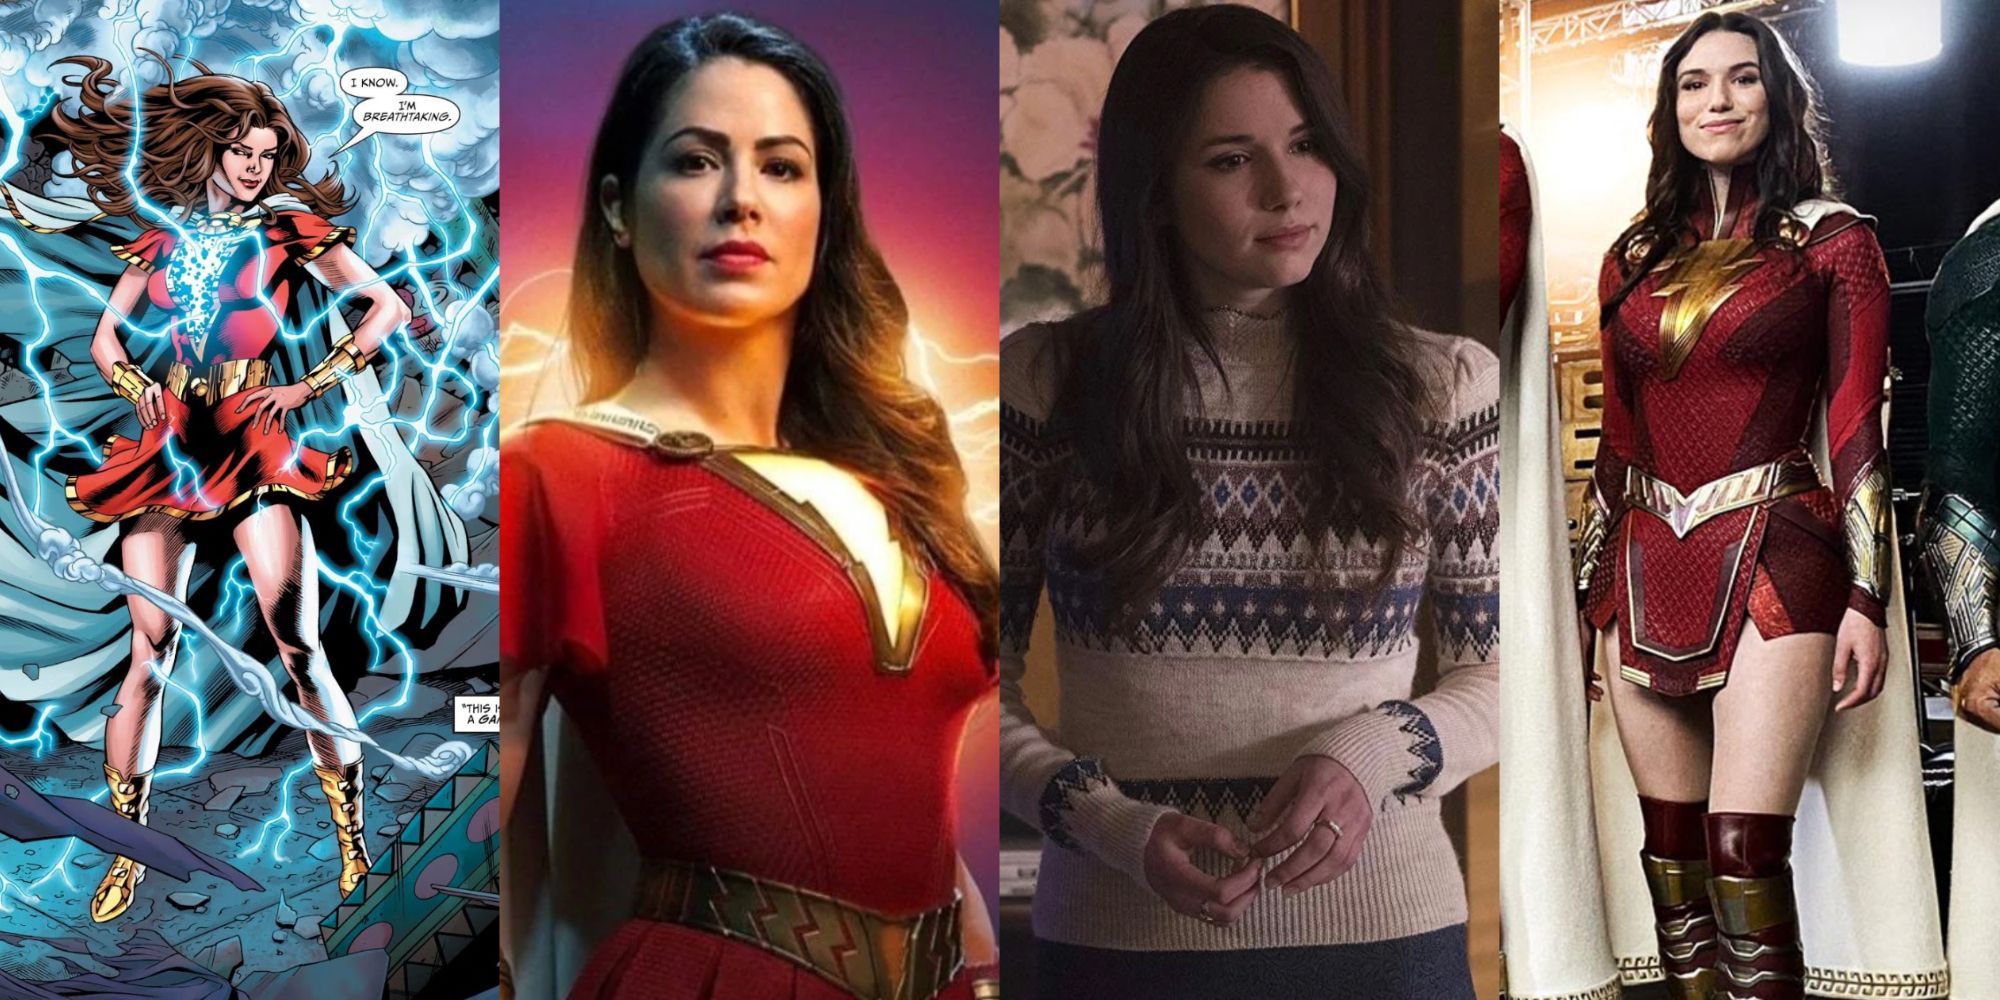 A split image features Mary as Lady Shazam in DC Comics, Michelle Borth as Mary in live action, and Grace Fulton as Mary and superhero Mary in live action